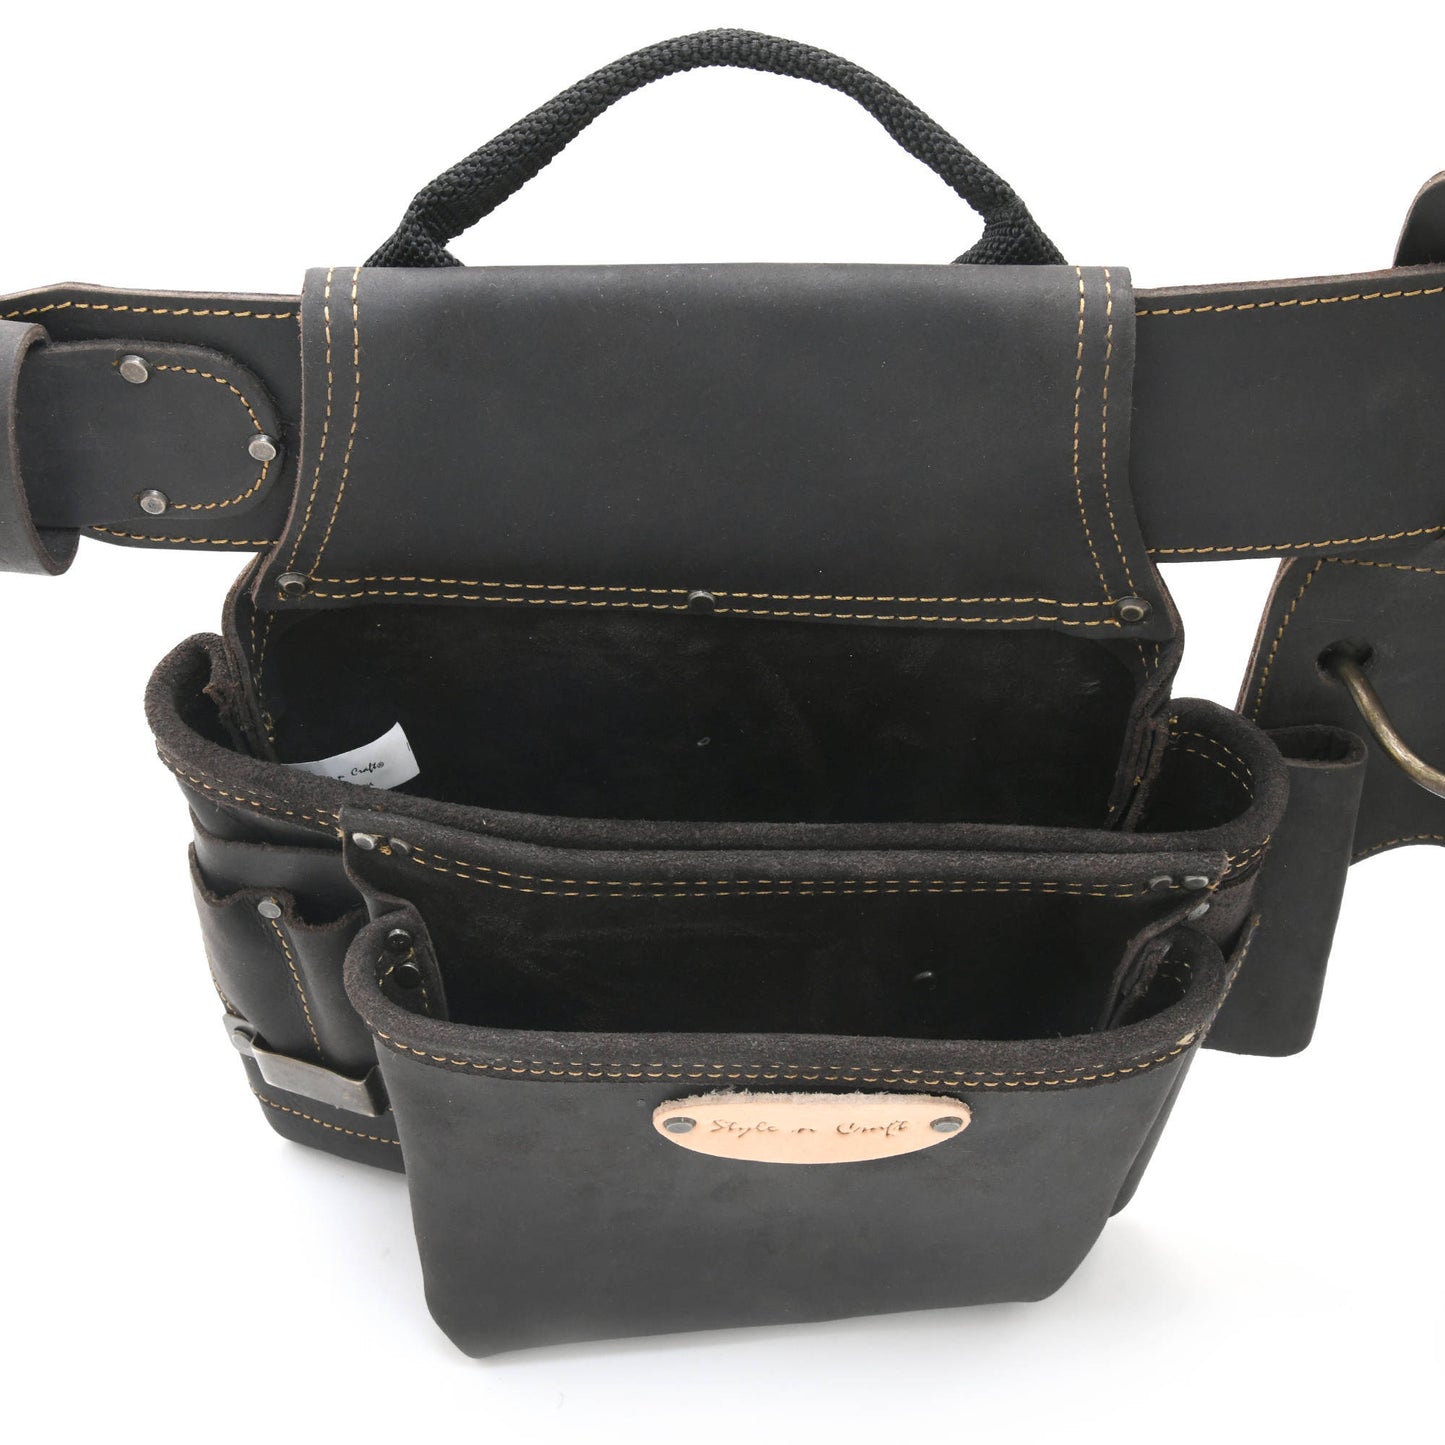 Style n Craft 90429 - Top Angled View of the Left Side Pouch of the 4 Piece 17 Pocket Pro Framer’s Combo in Full Grain Oiled Leather in Dark Brown Color  Showing the Front Pocket, Pencil Holders & Metal Tape Clip